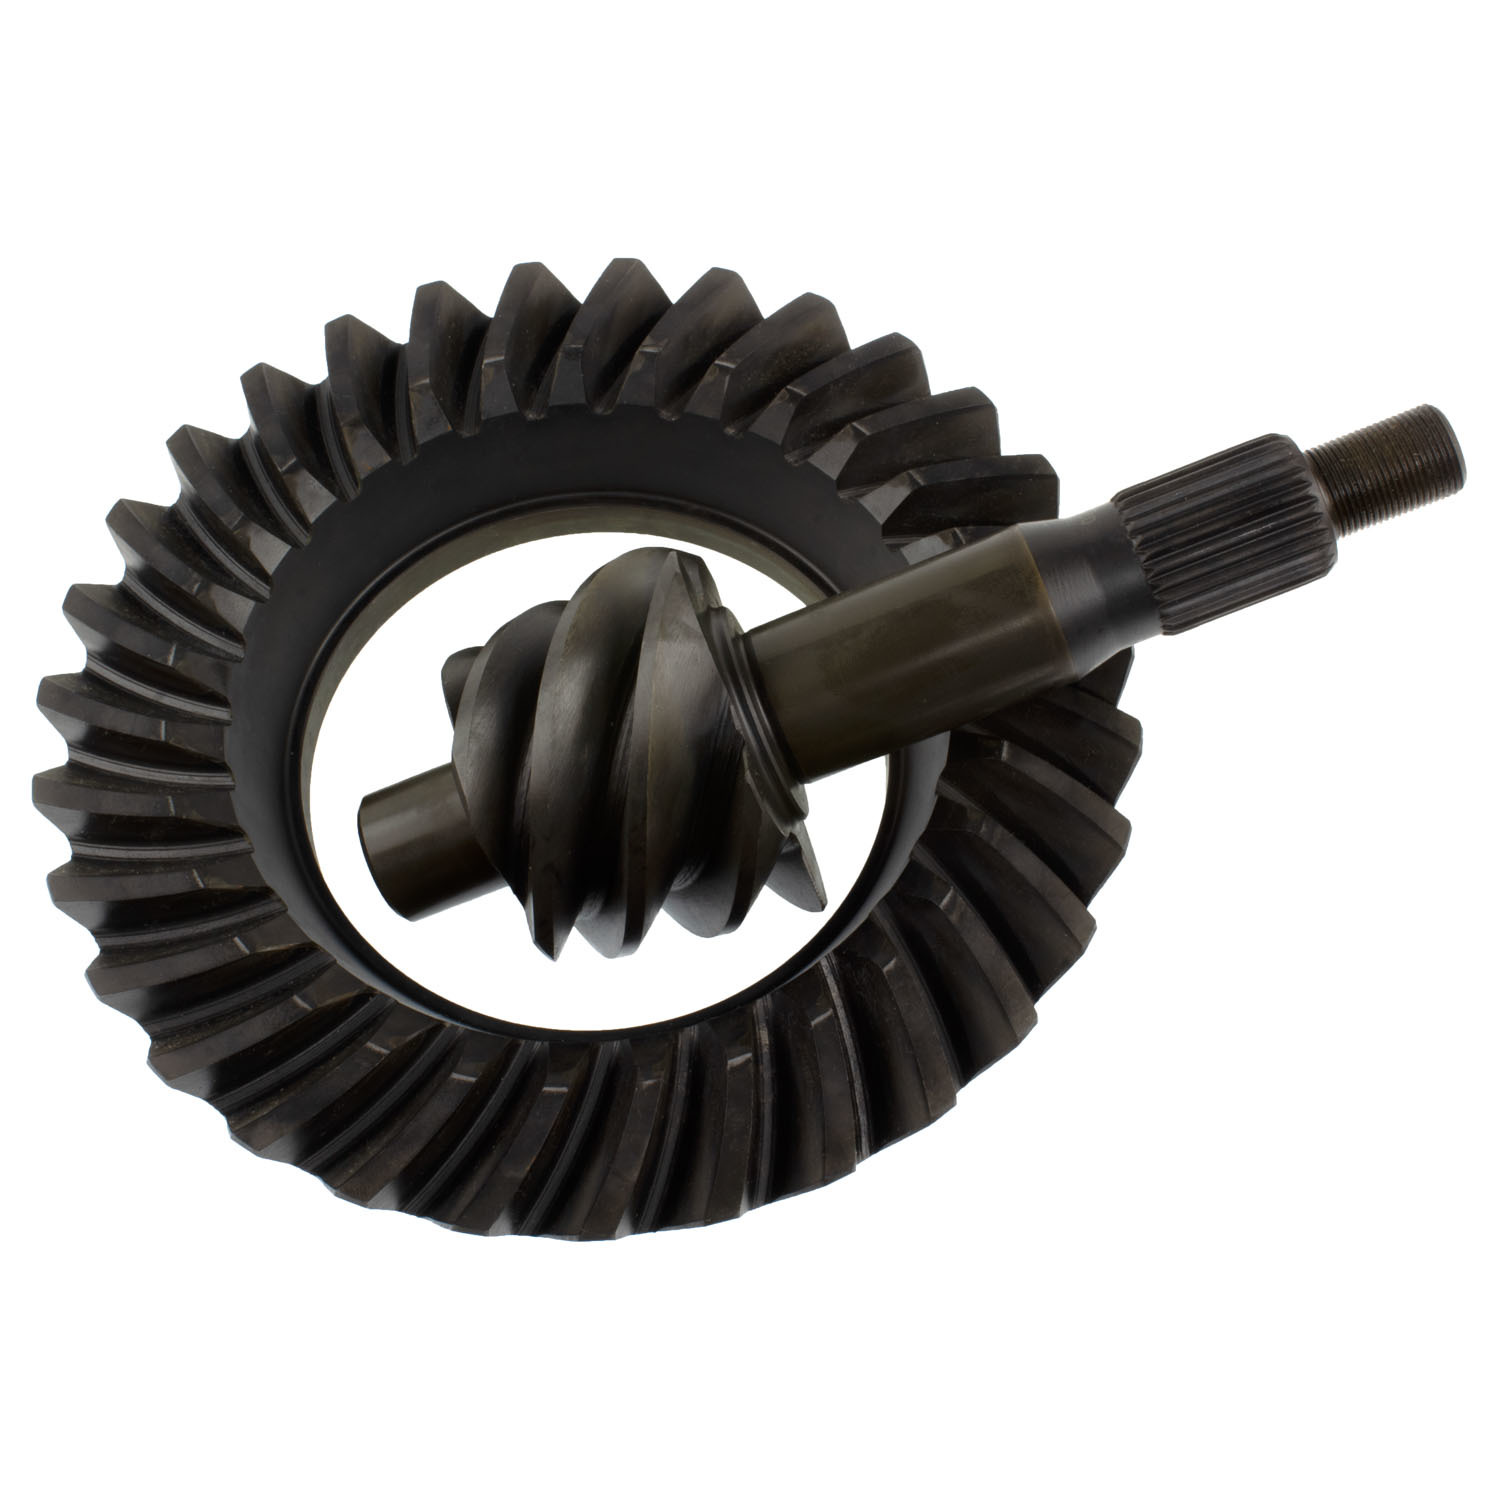 Richmond Gear F9620 - Ring and Pinion, Excel, 6.20 Ratio, 28 Spline Pinion, Ford 9 in, Kit